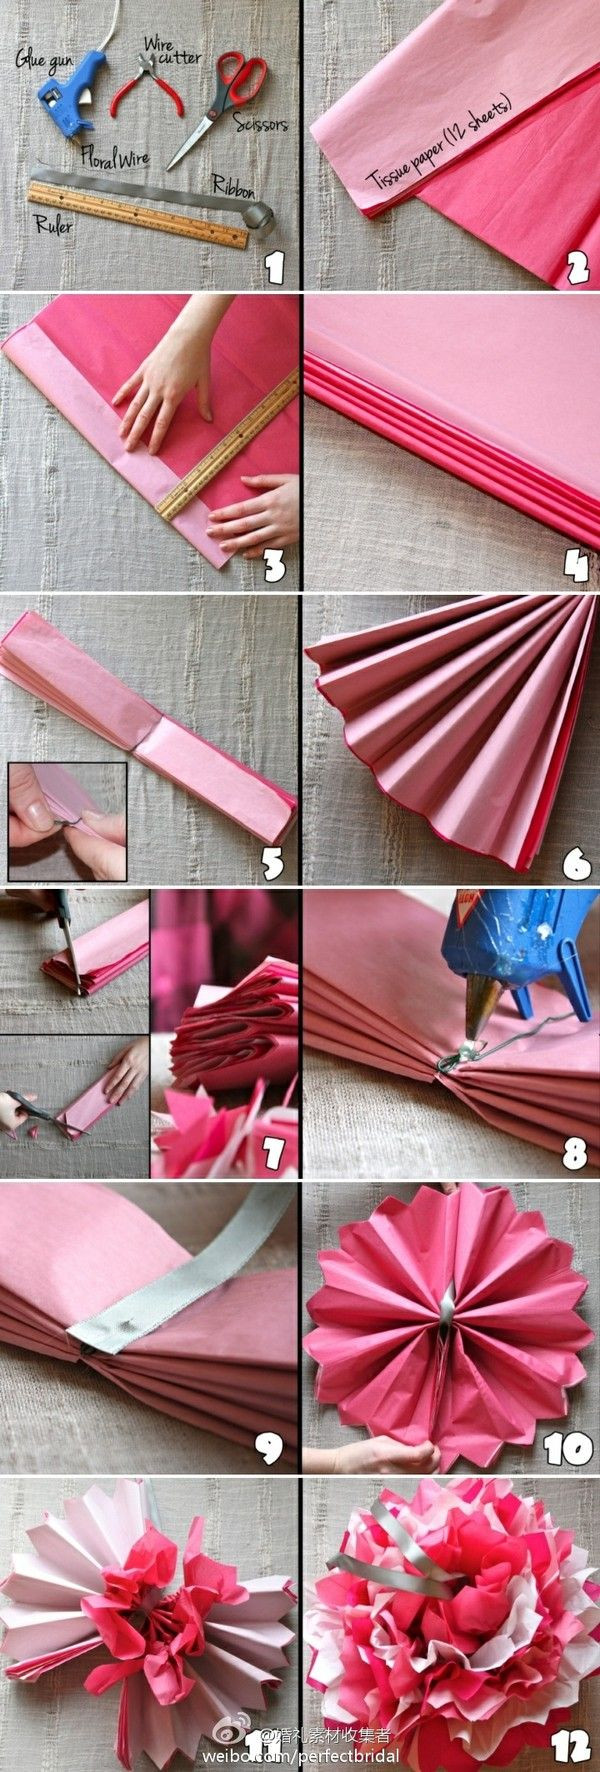 Paper Decorations DIY
 DIY Beautiful Tissue Paper Flowers for Wedding